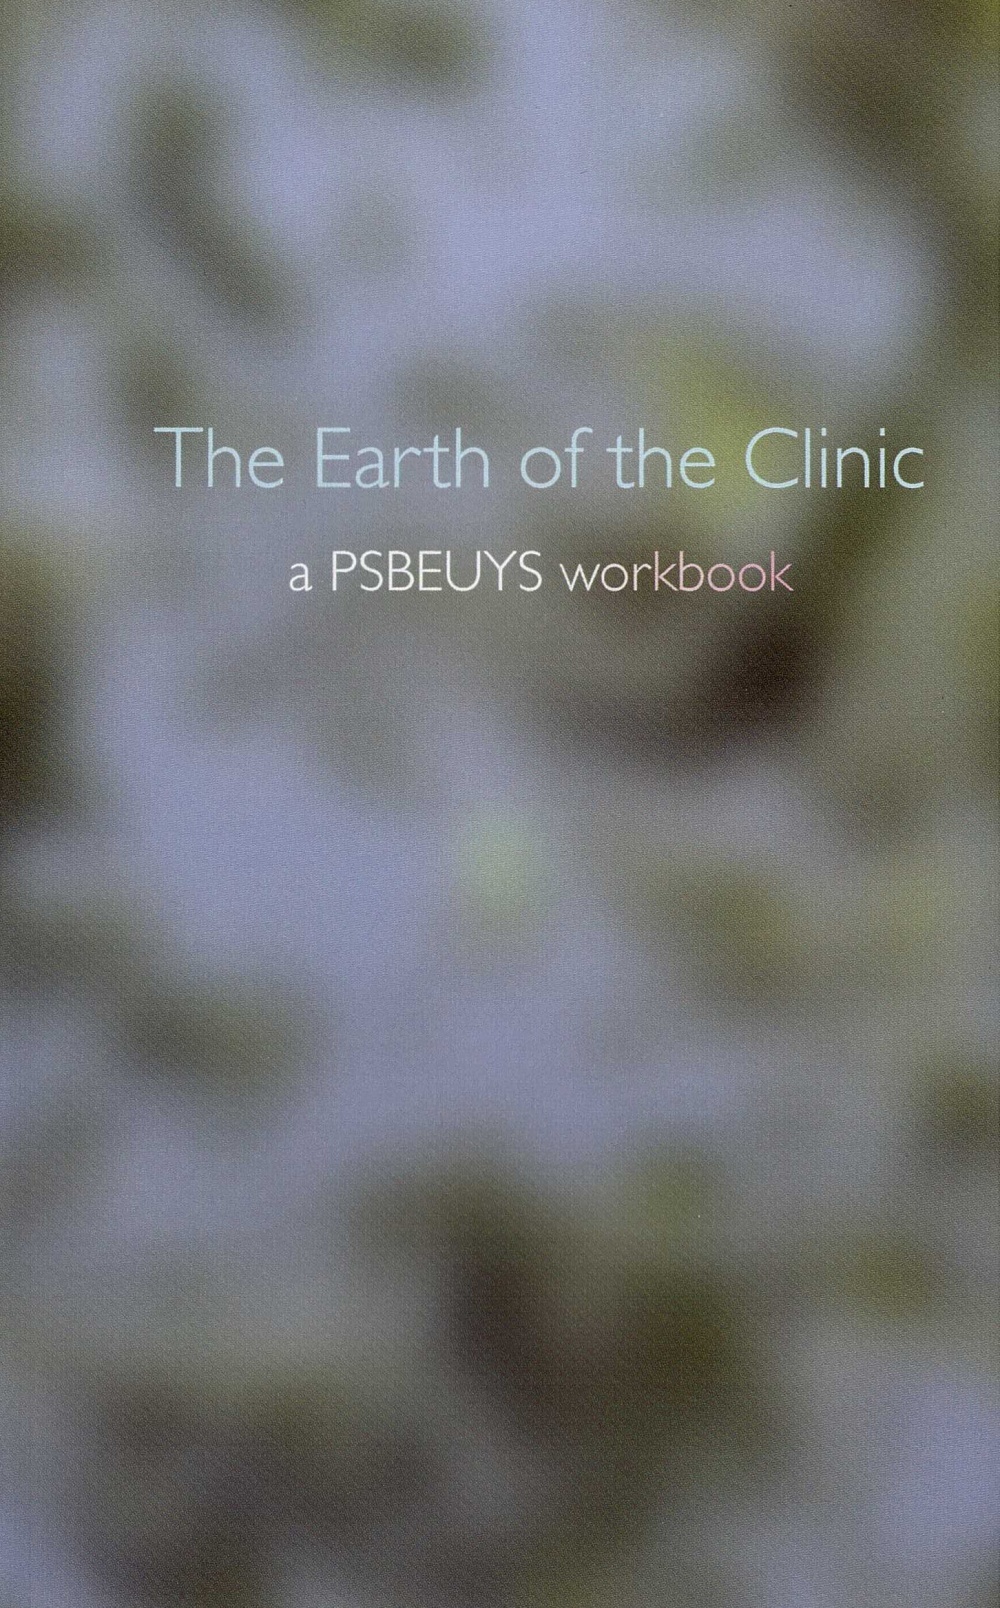 The Earth of the Clinic, A PSBEUYS workbook